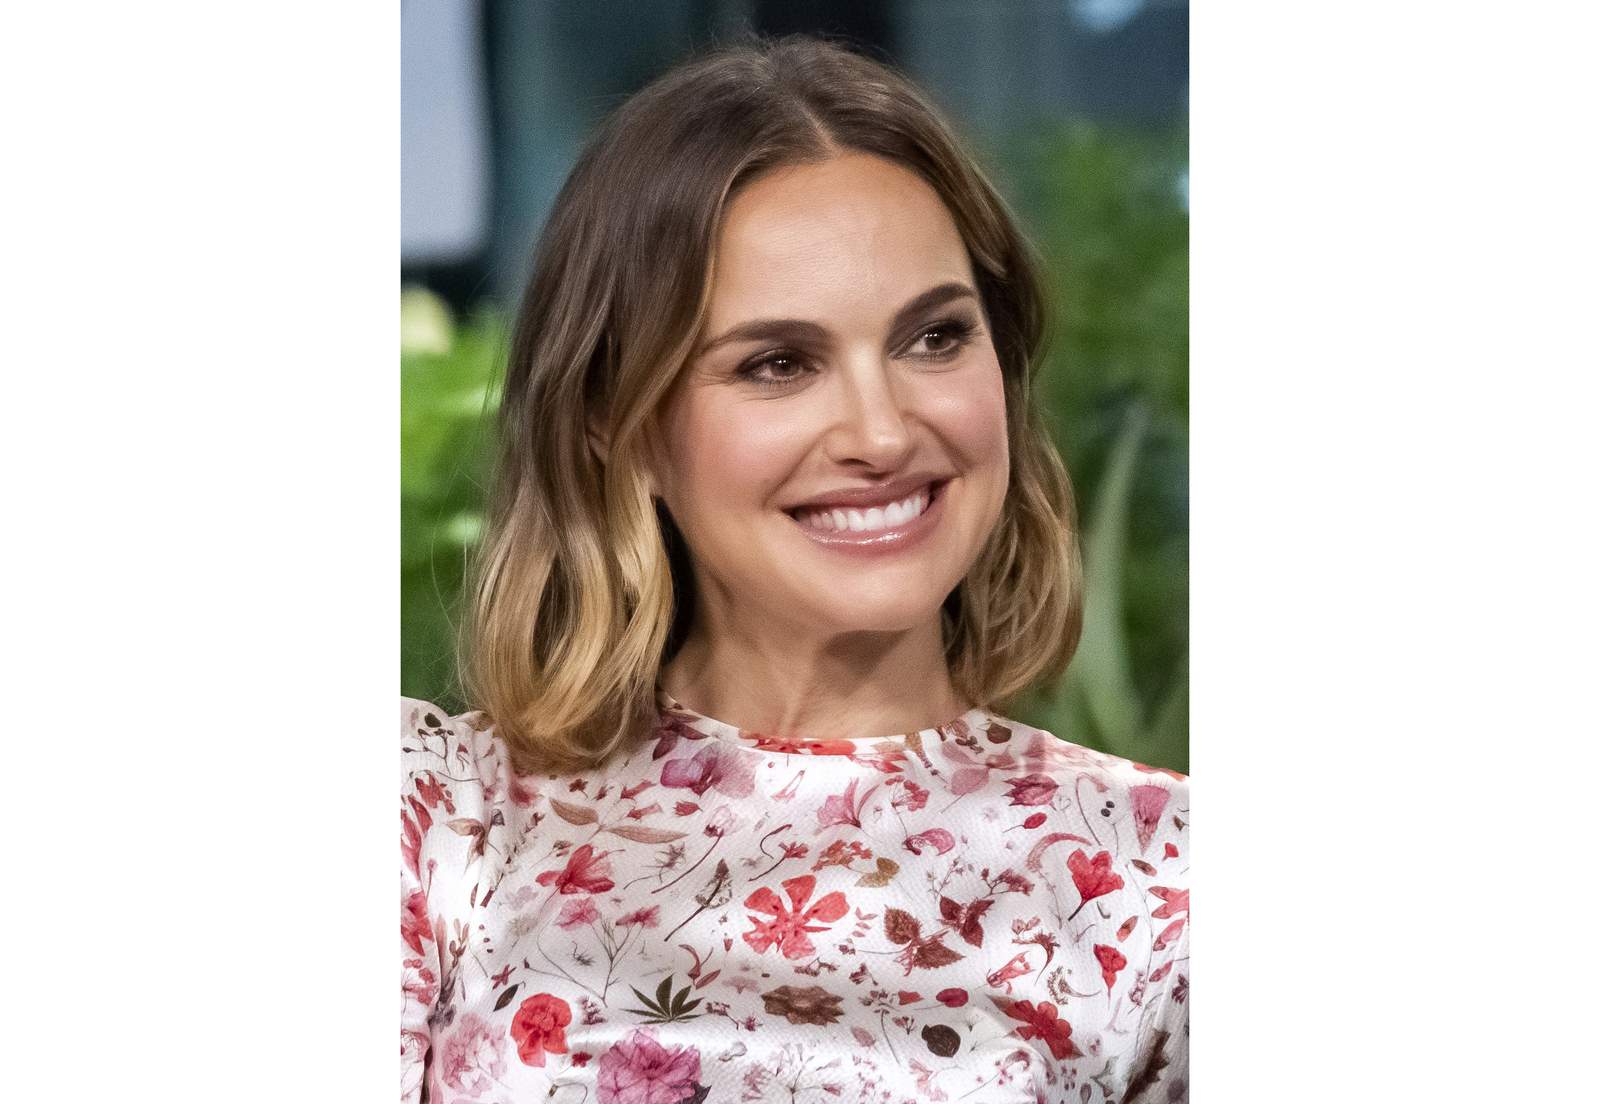 Bookish: Natalie Portman to chair National Library Week